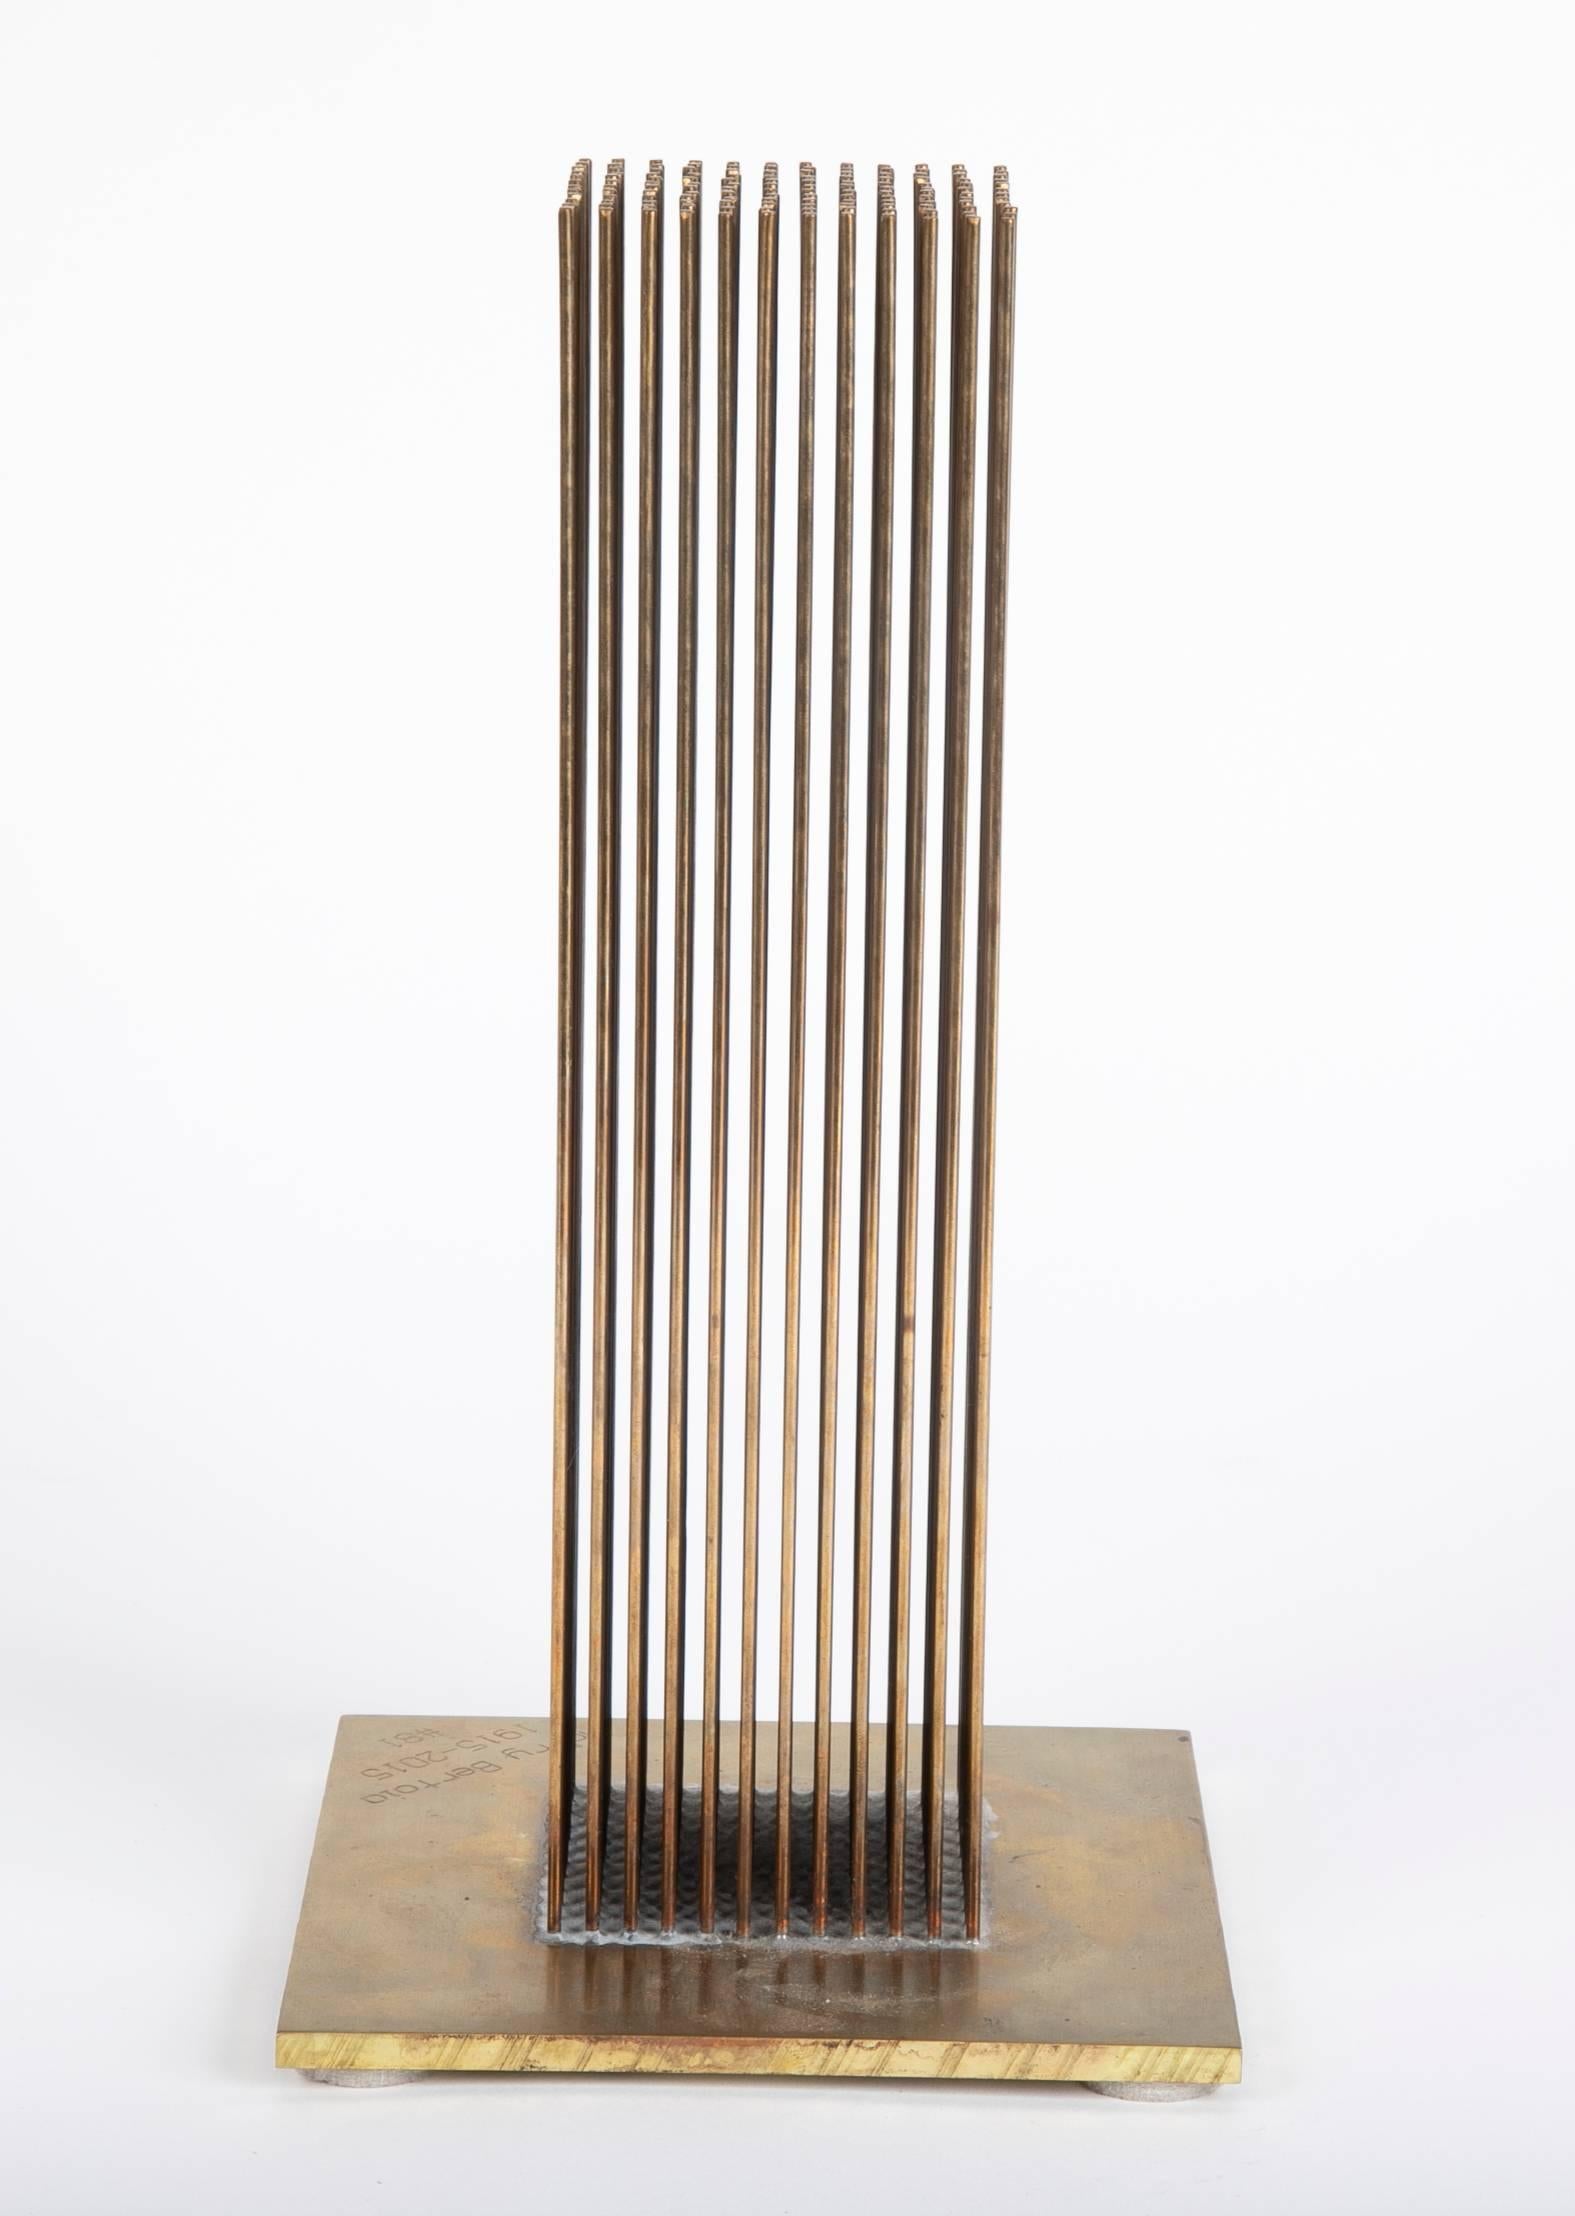  Originally designed by Harry Bertoia in 1970 this sonambient sculpture is #81 of a limited edition of 100 reproductions authorized by the Bertoia Estate and Bertoia Studio. The rods are bronze and silvered to a brass base and have a wonderful